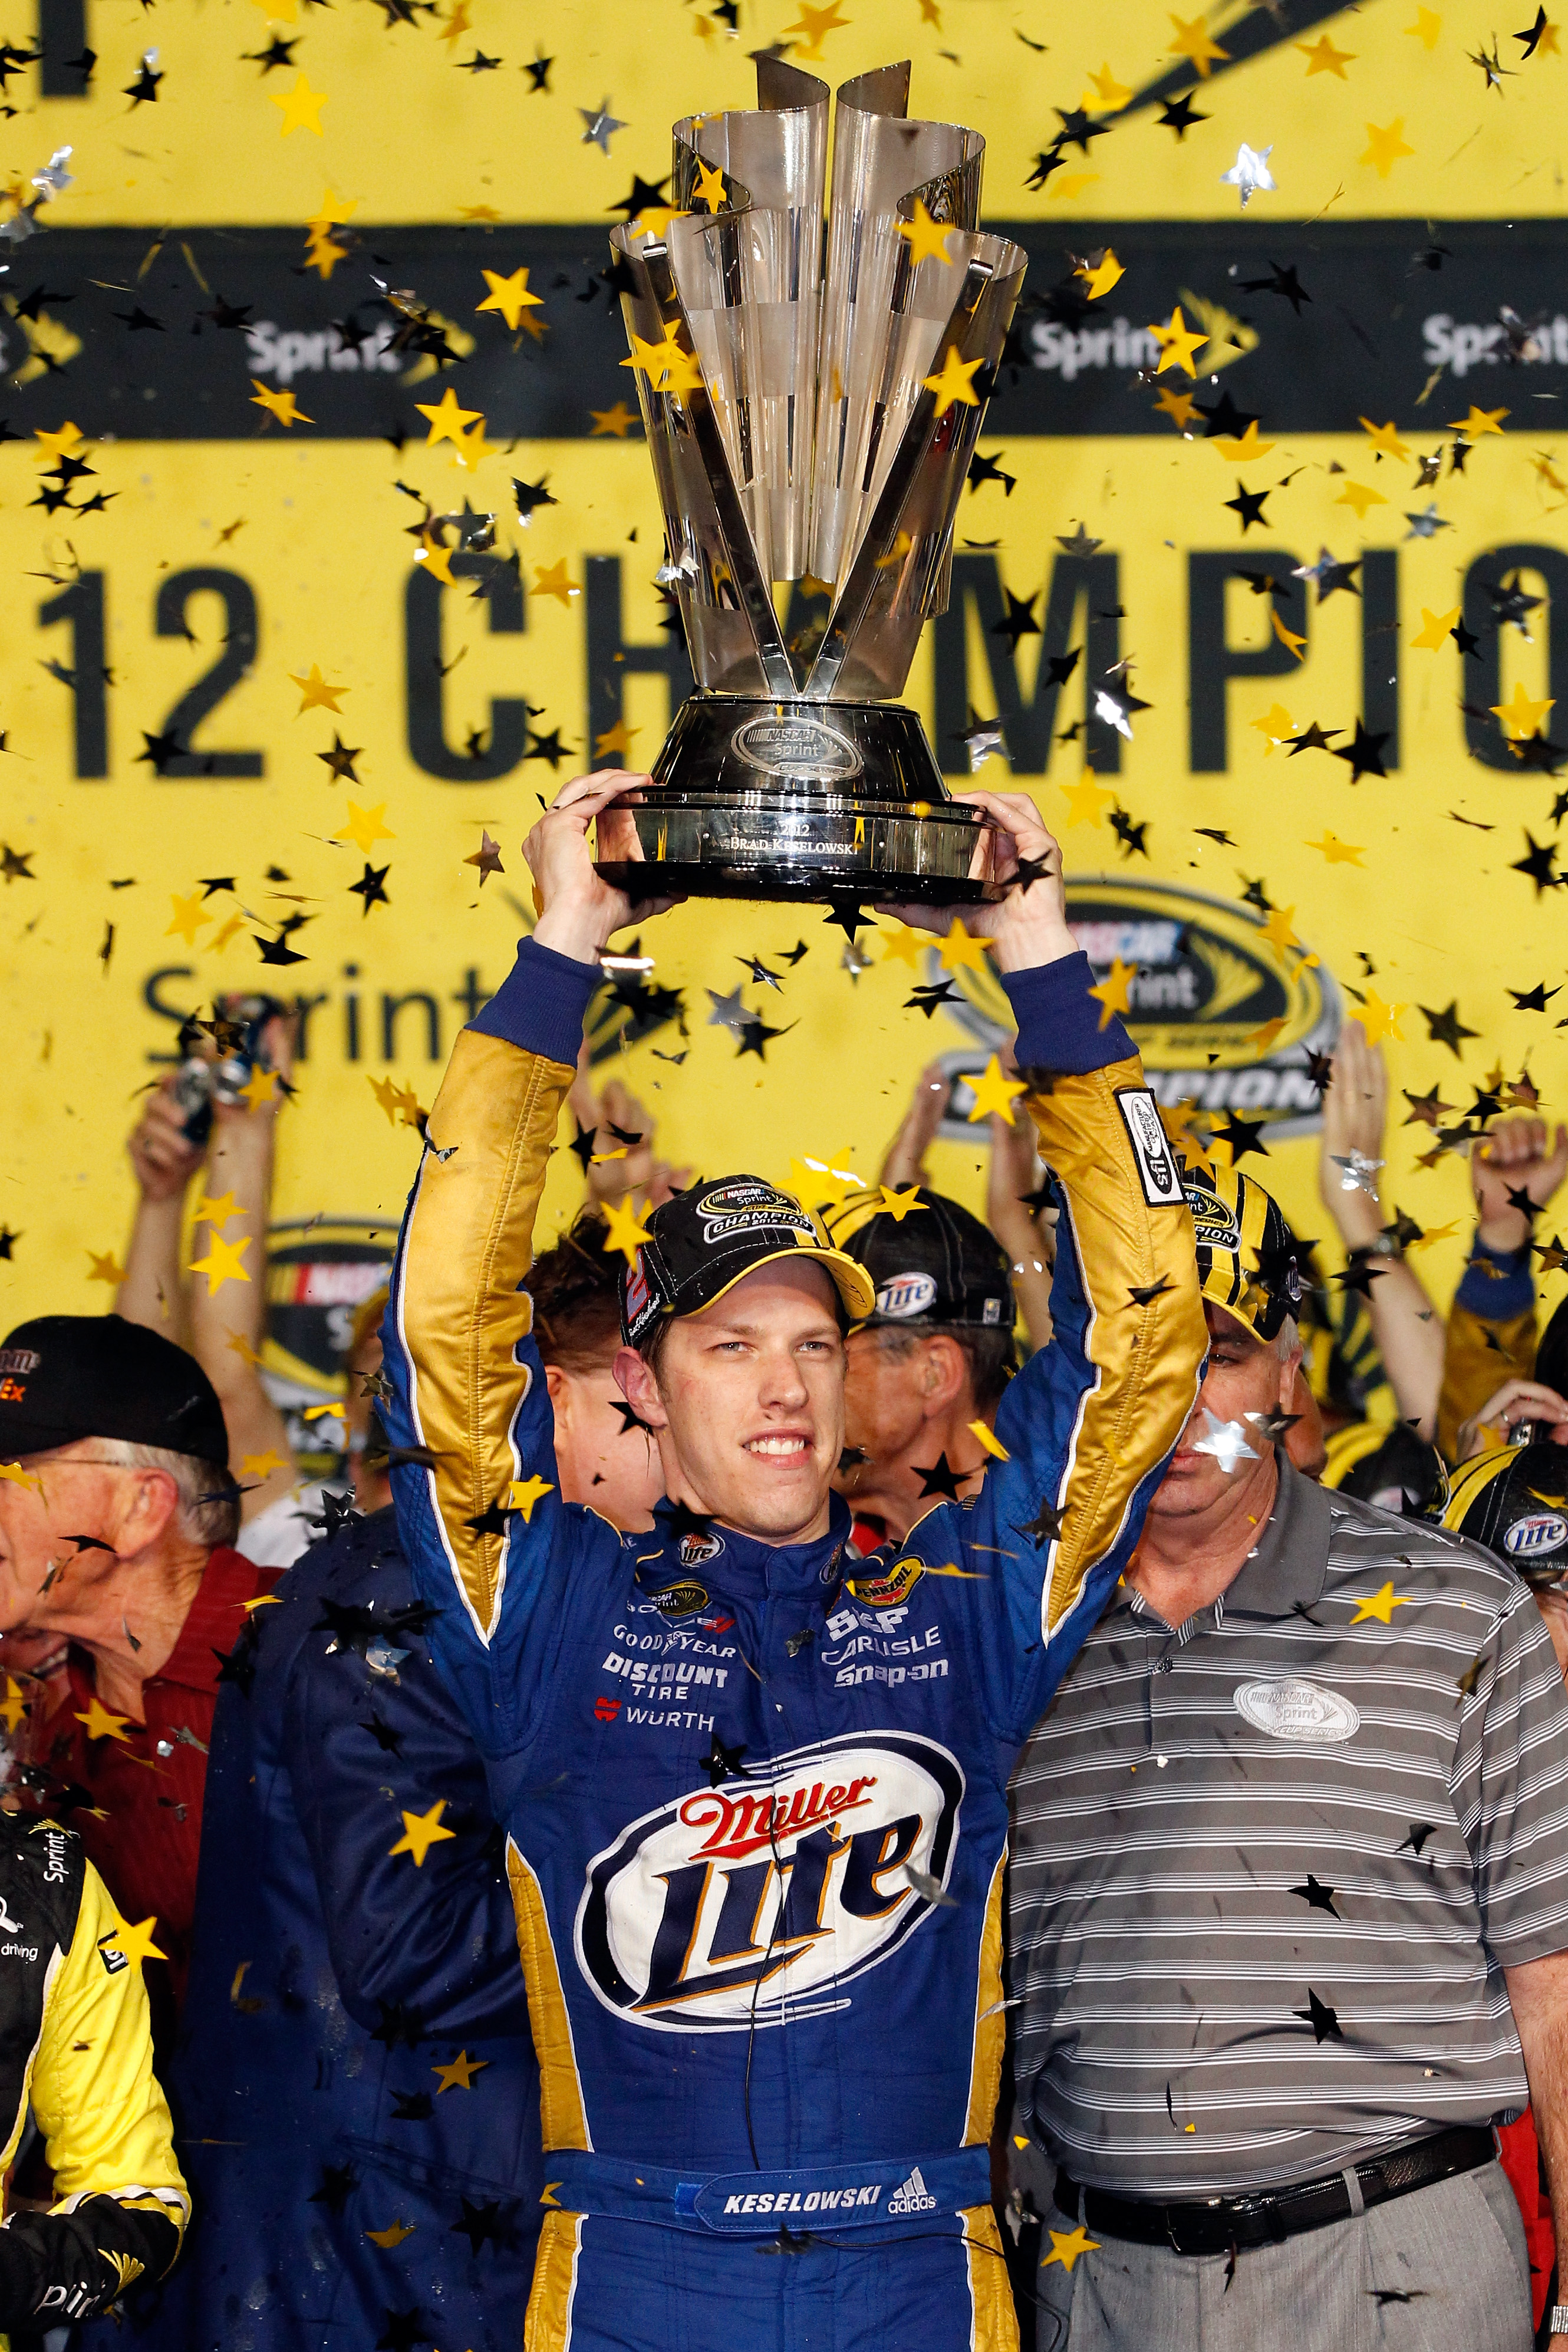 For the first time since 2004, a new name can be added to the list of Sprint Cup champions.